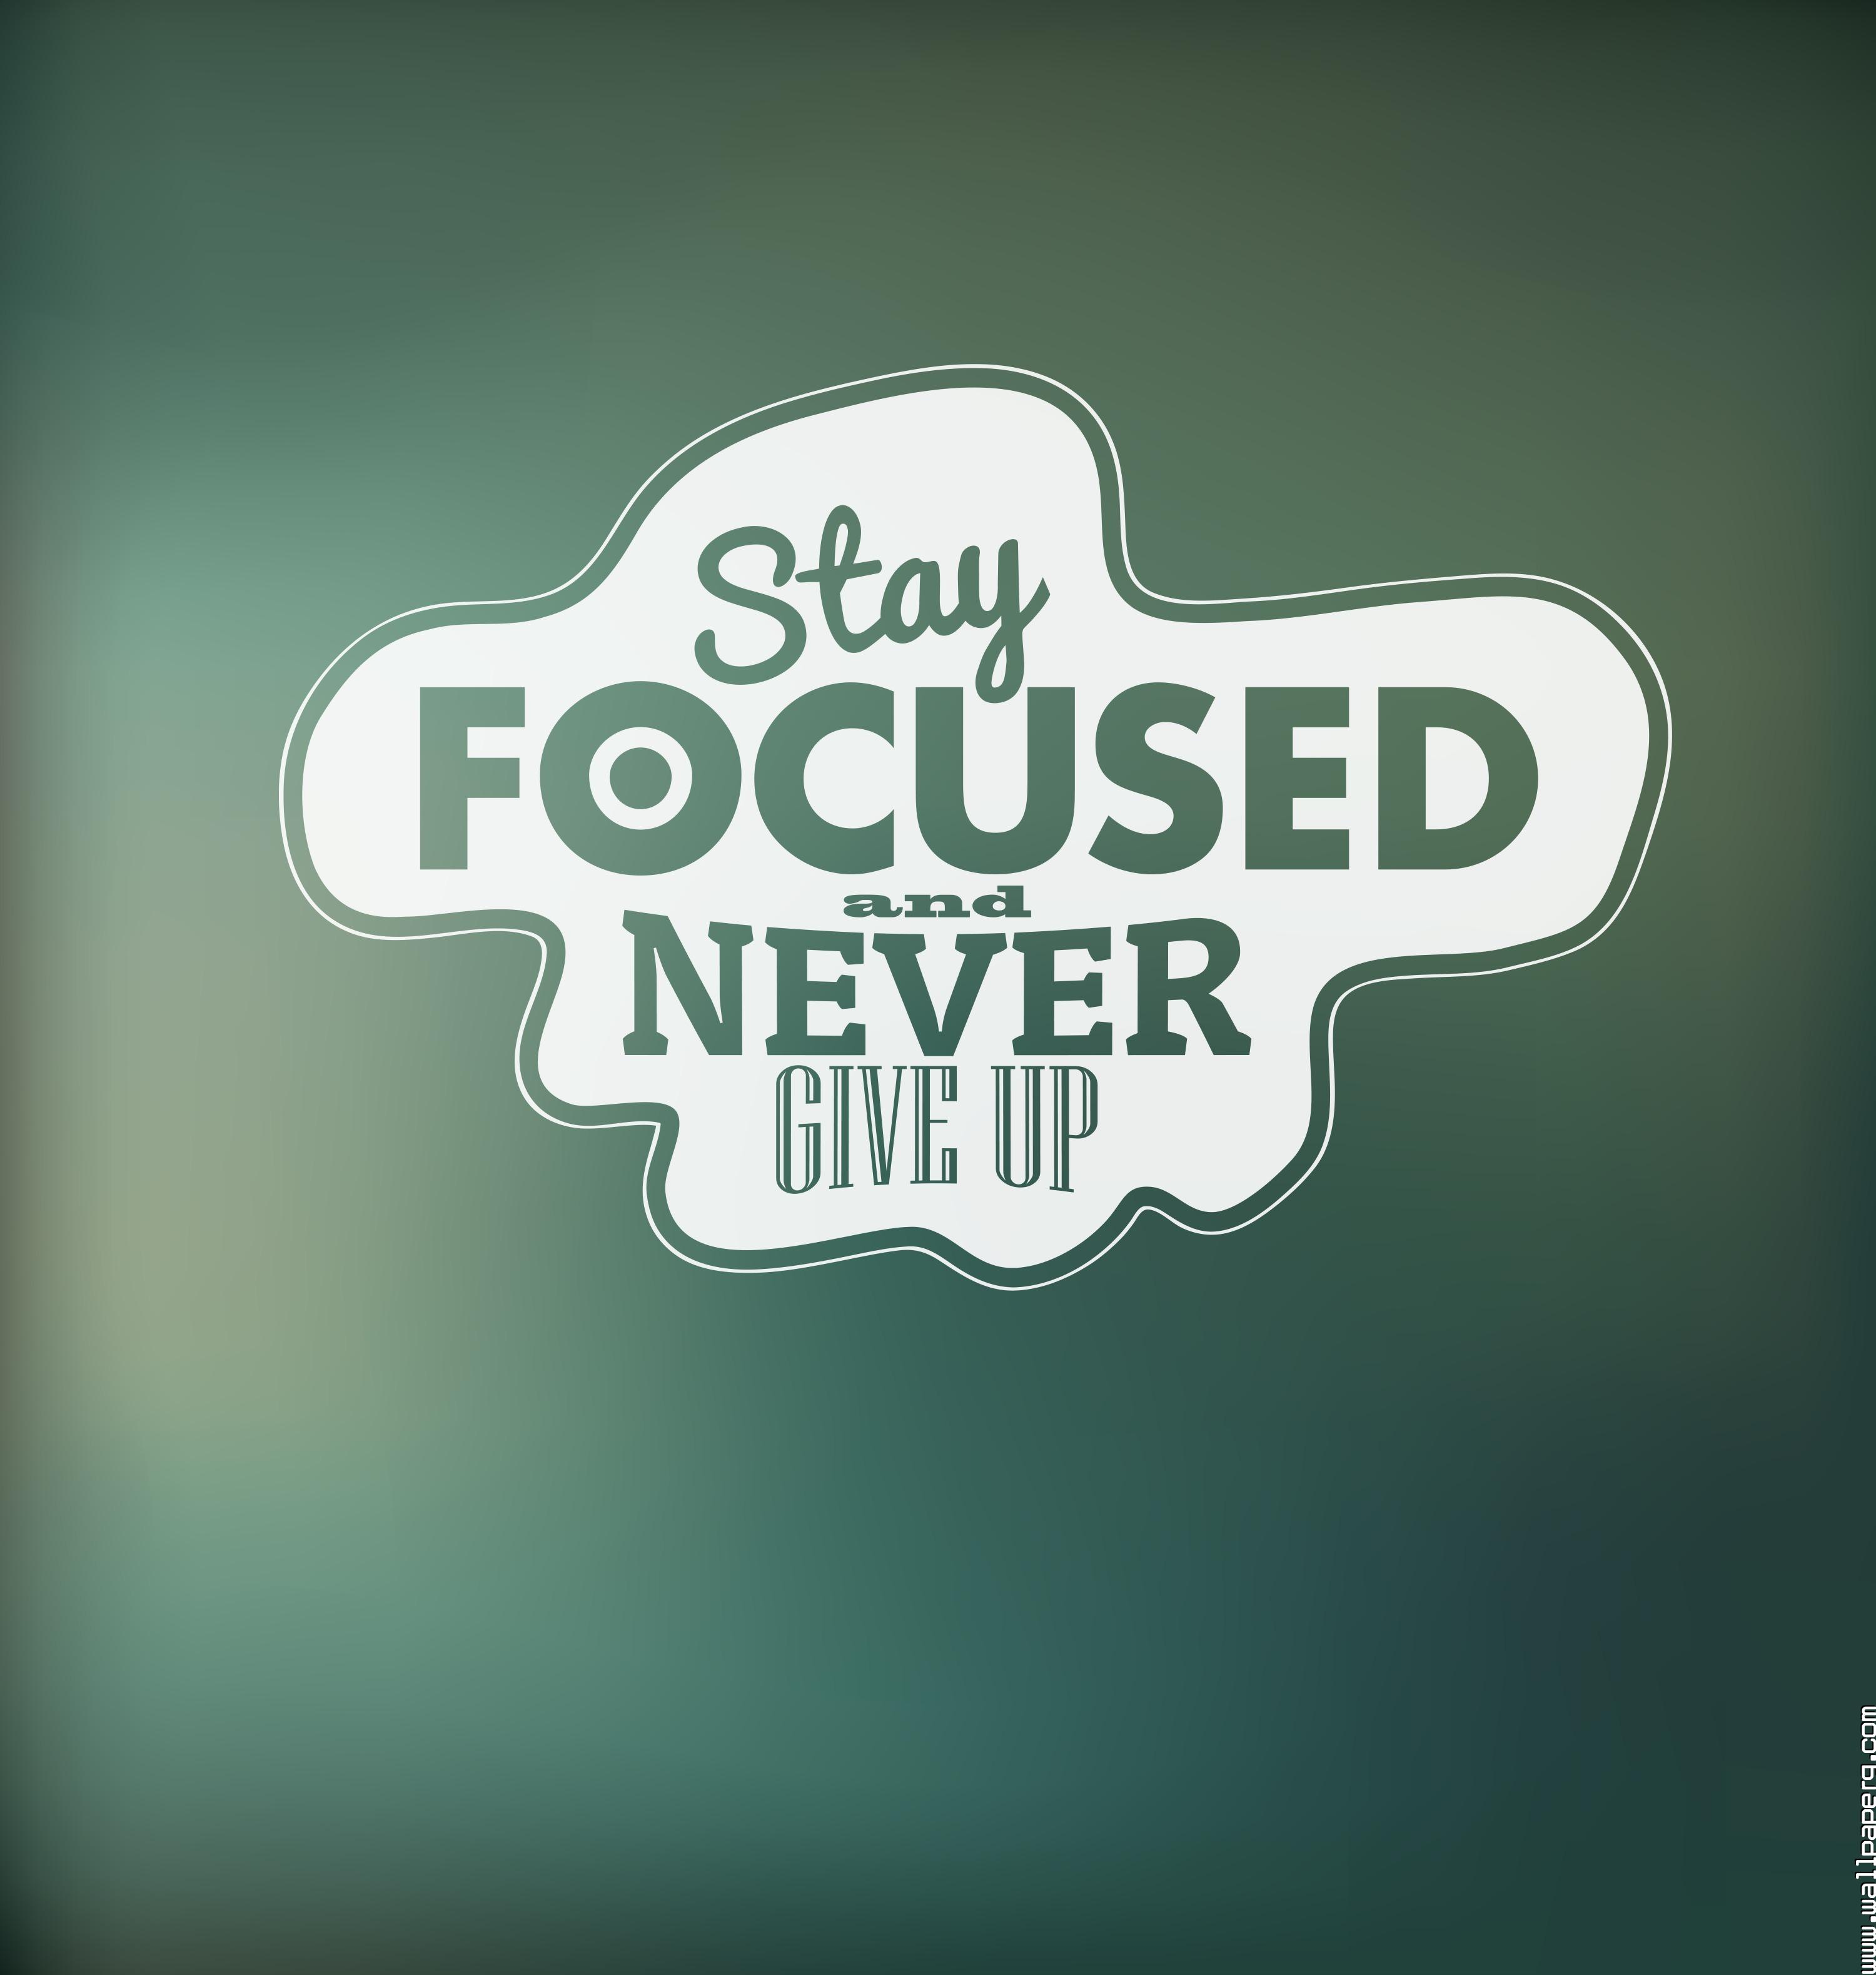 Download Stay focused and never give up motivational quote - Iphone saying  wallpapers for your mobile cell phone